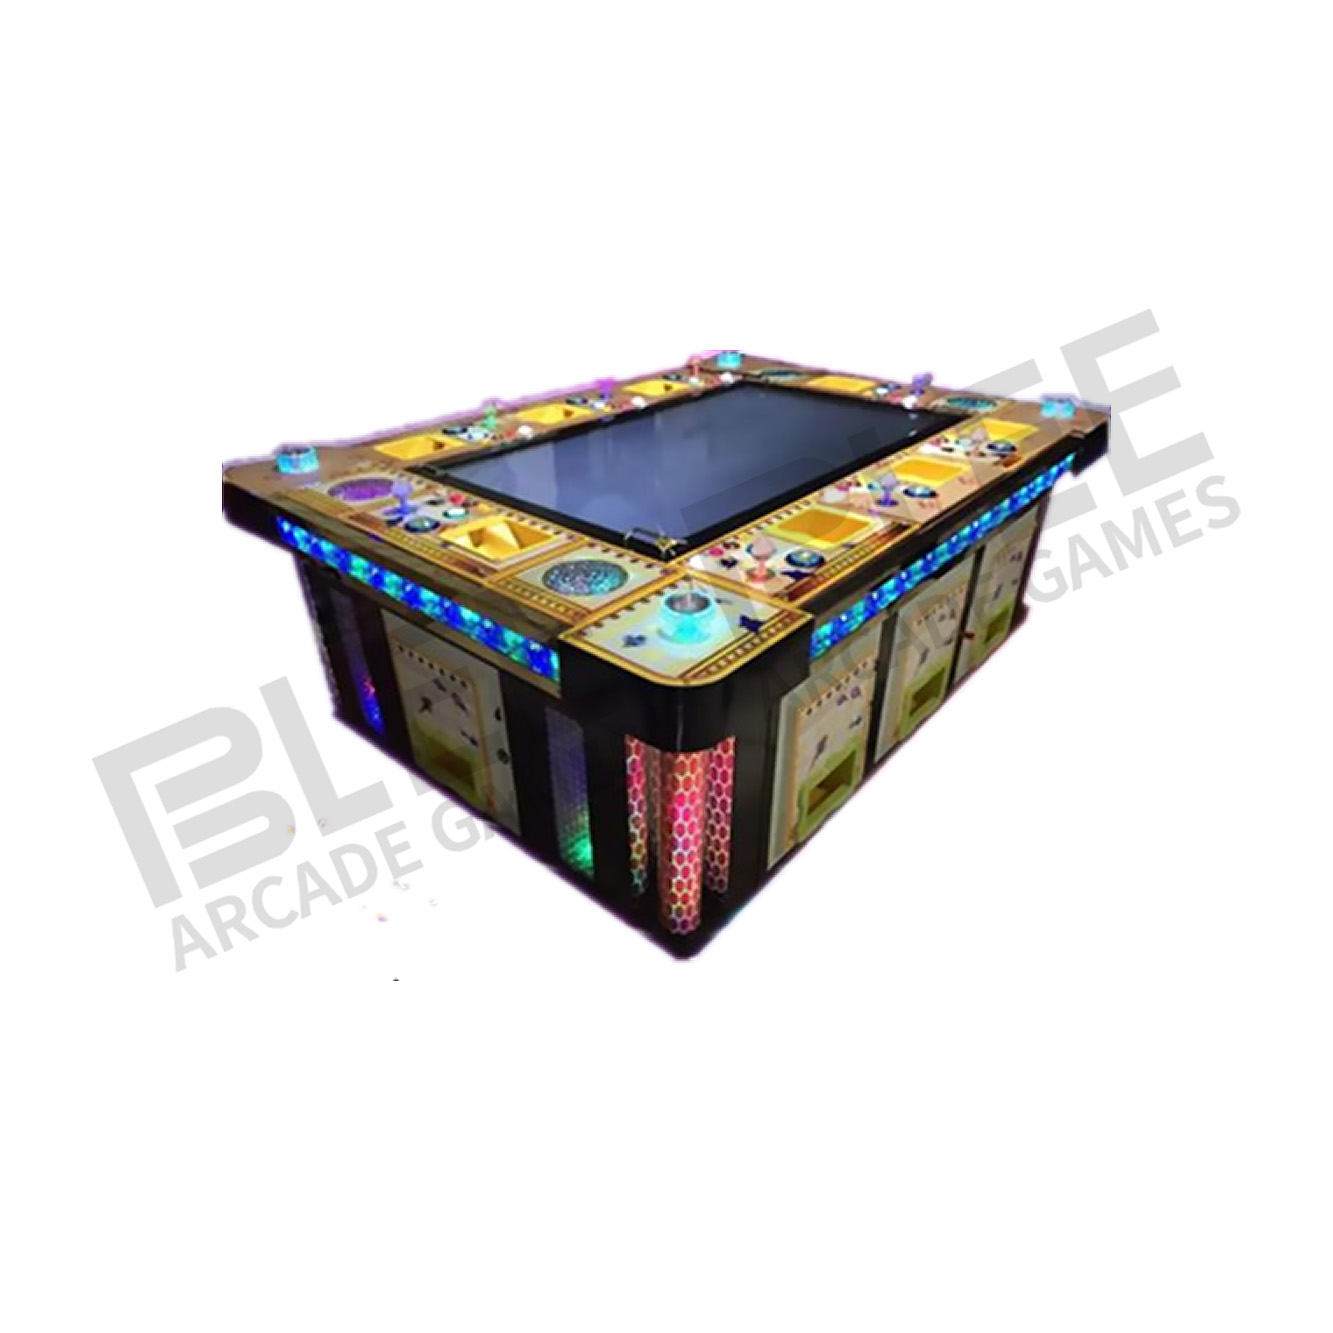 BLEE-Affordable Fish Table Game | New Arcade Machines For Sale Factory